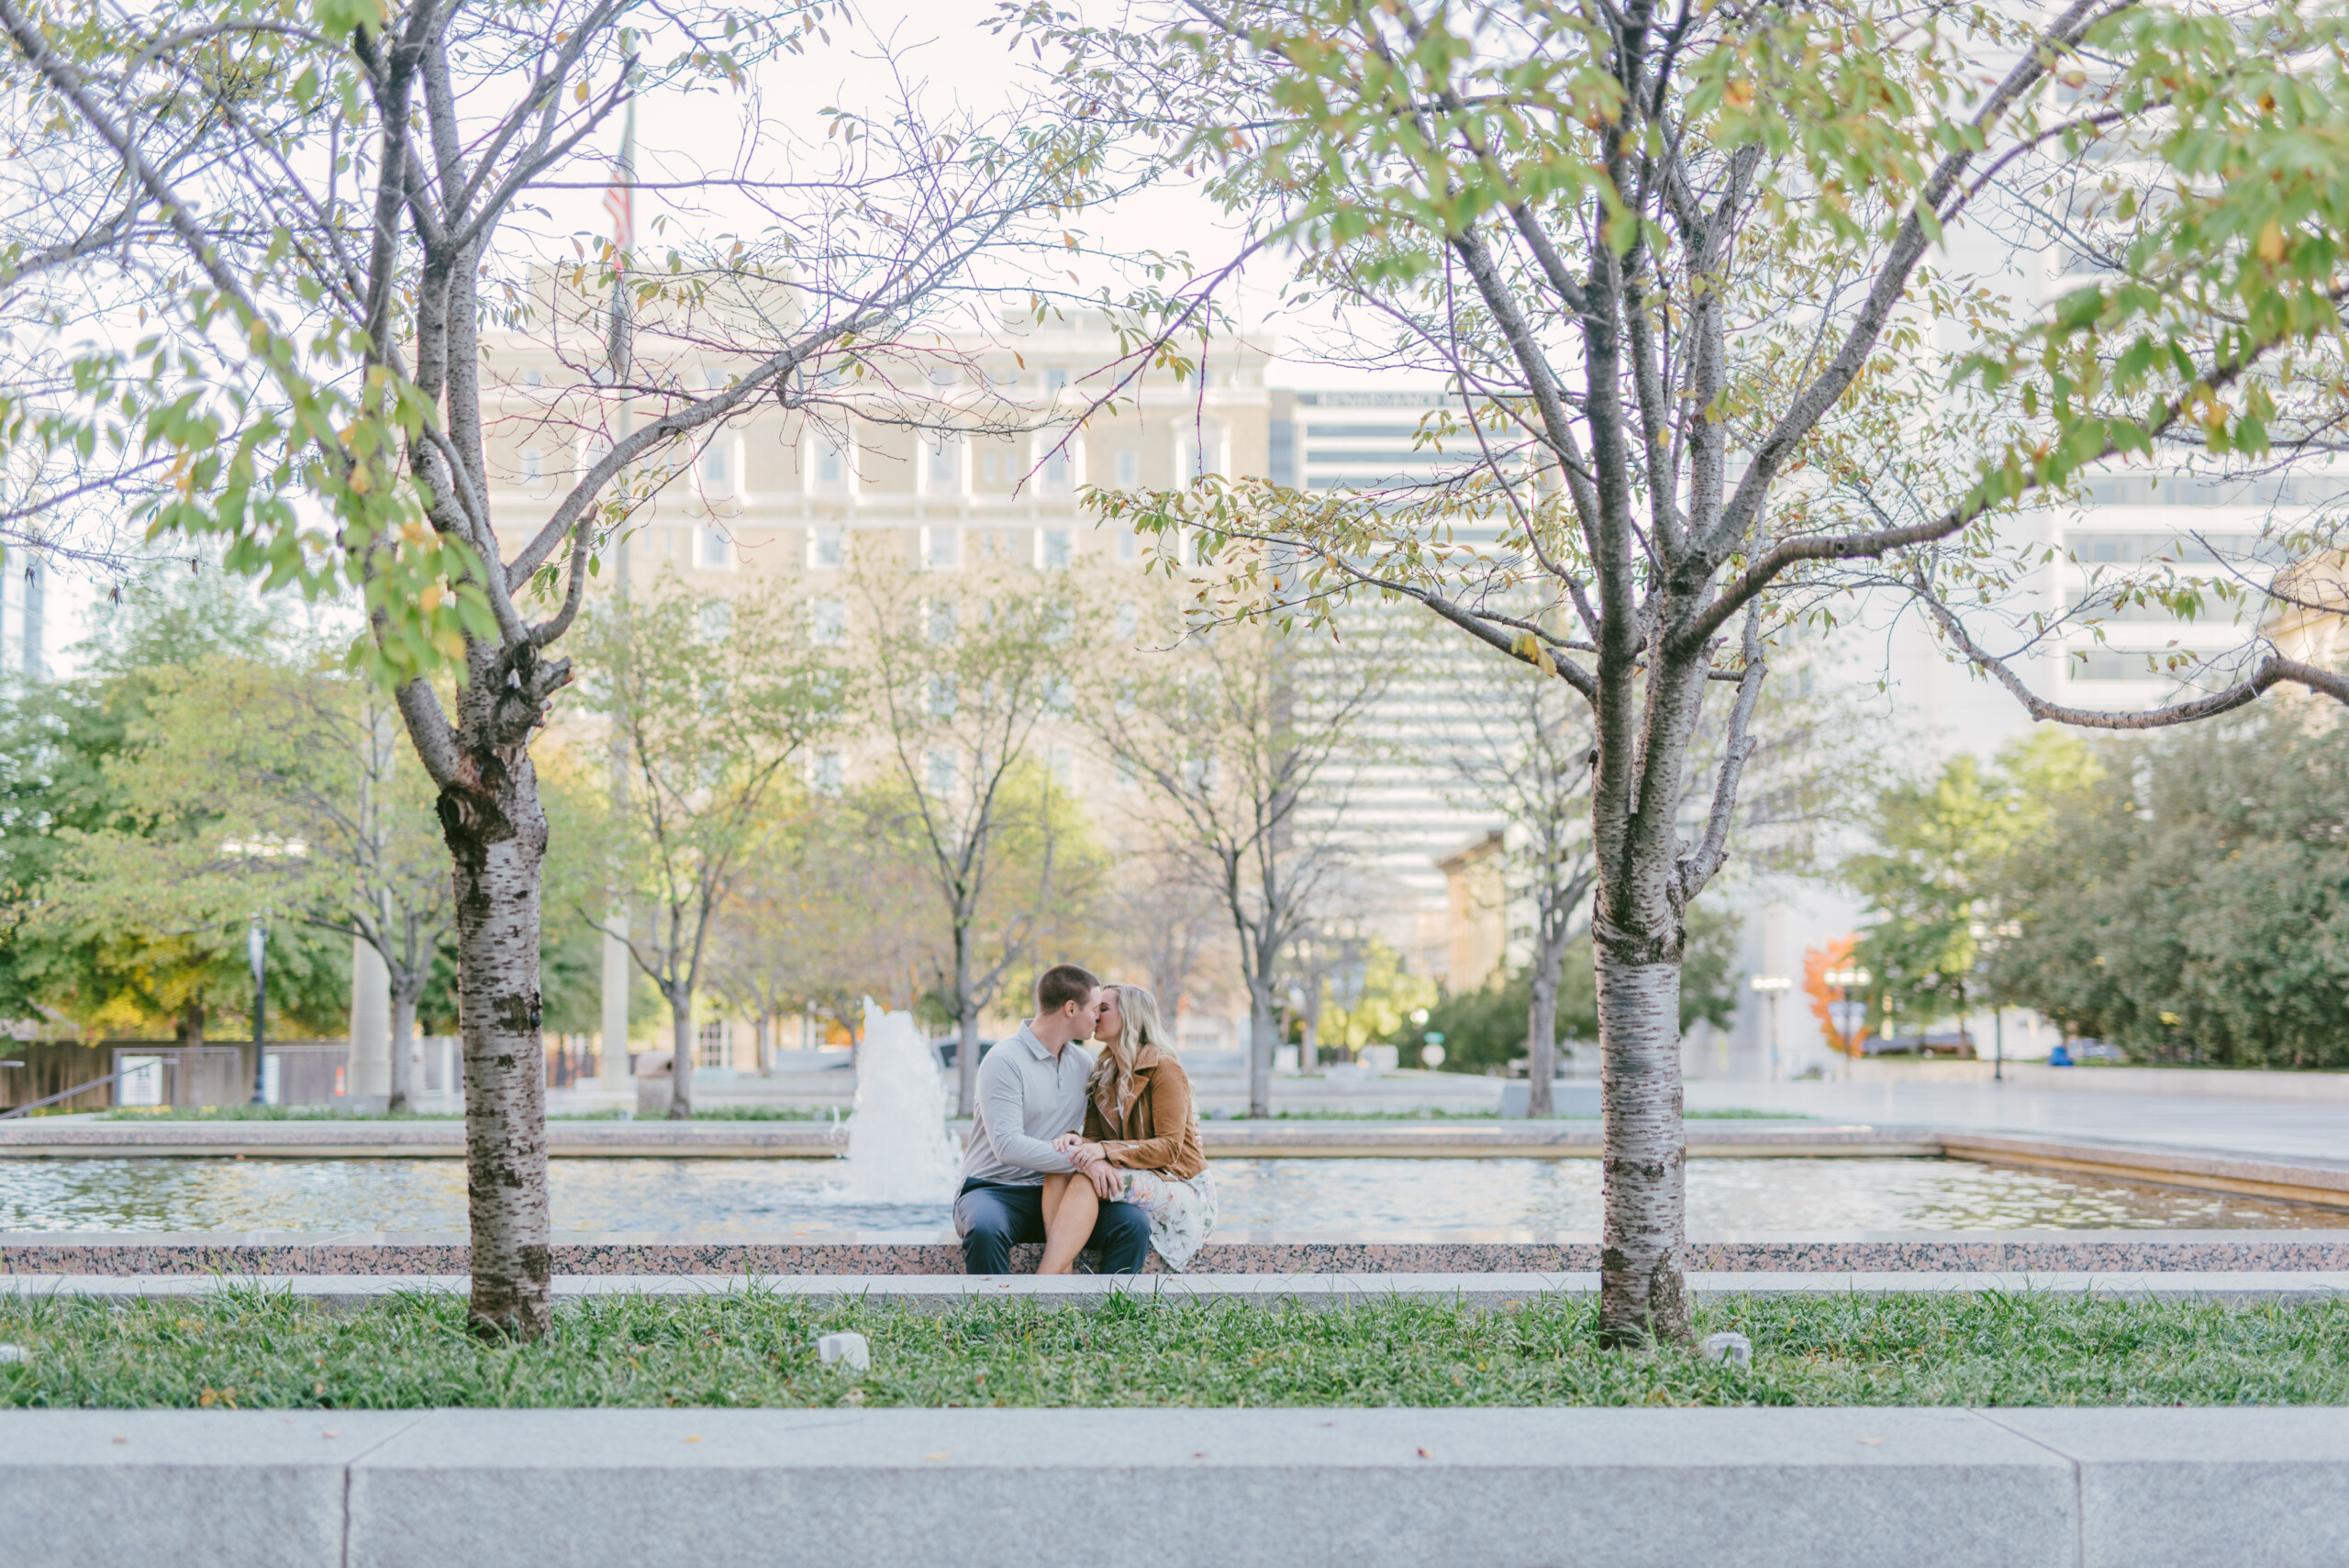 Cute & Casual Nashville Engagement Session in the Heart of the City